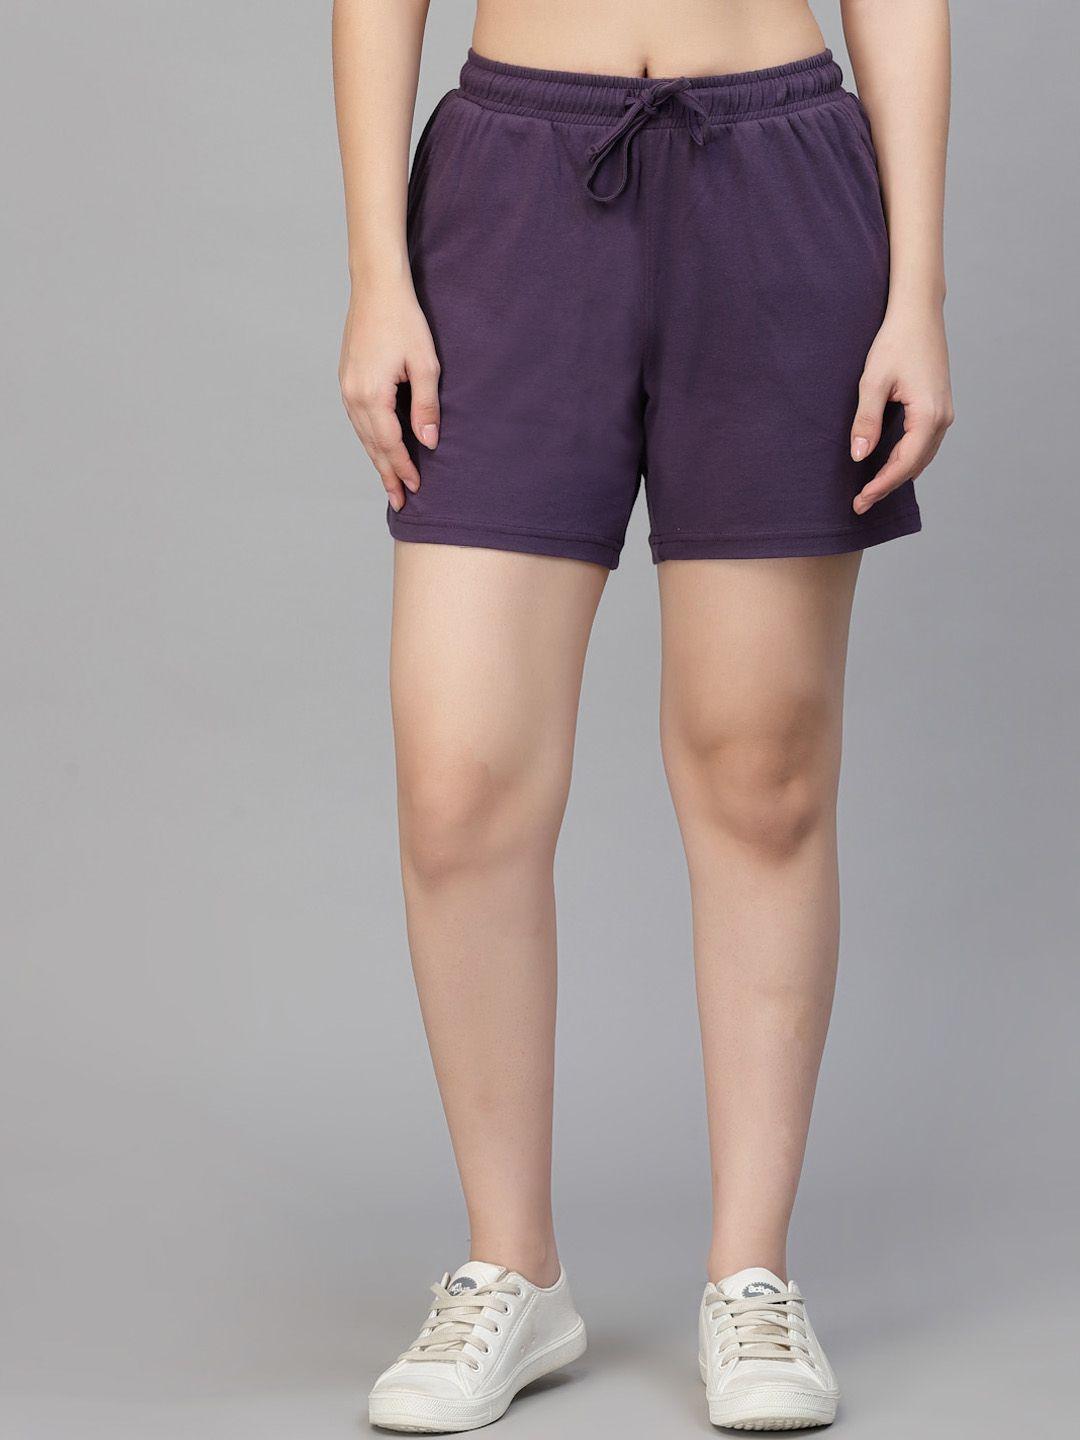 strong-and-brave-women-mid-rise-odour-free-cotton-shorts